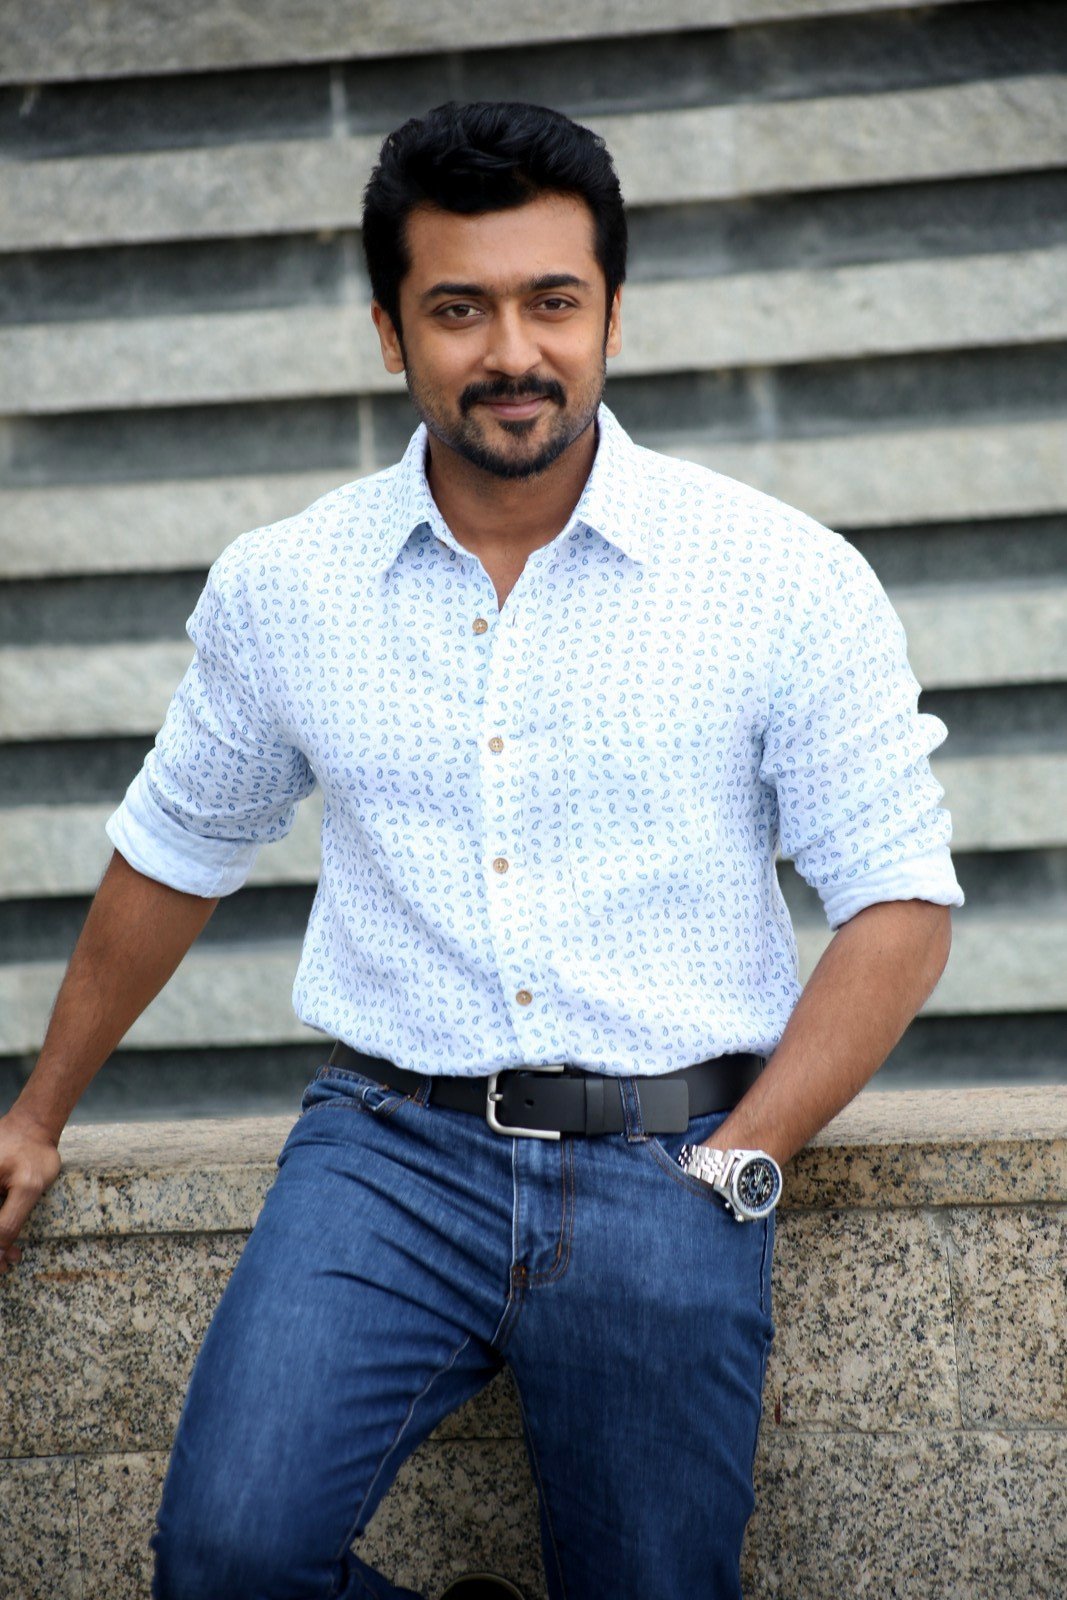 Suriya Interview For Si3 (Singam 3) Photos | Picture 1470000